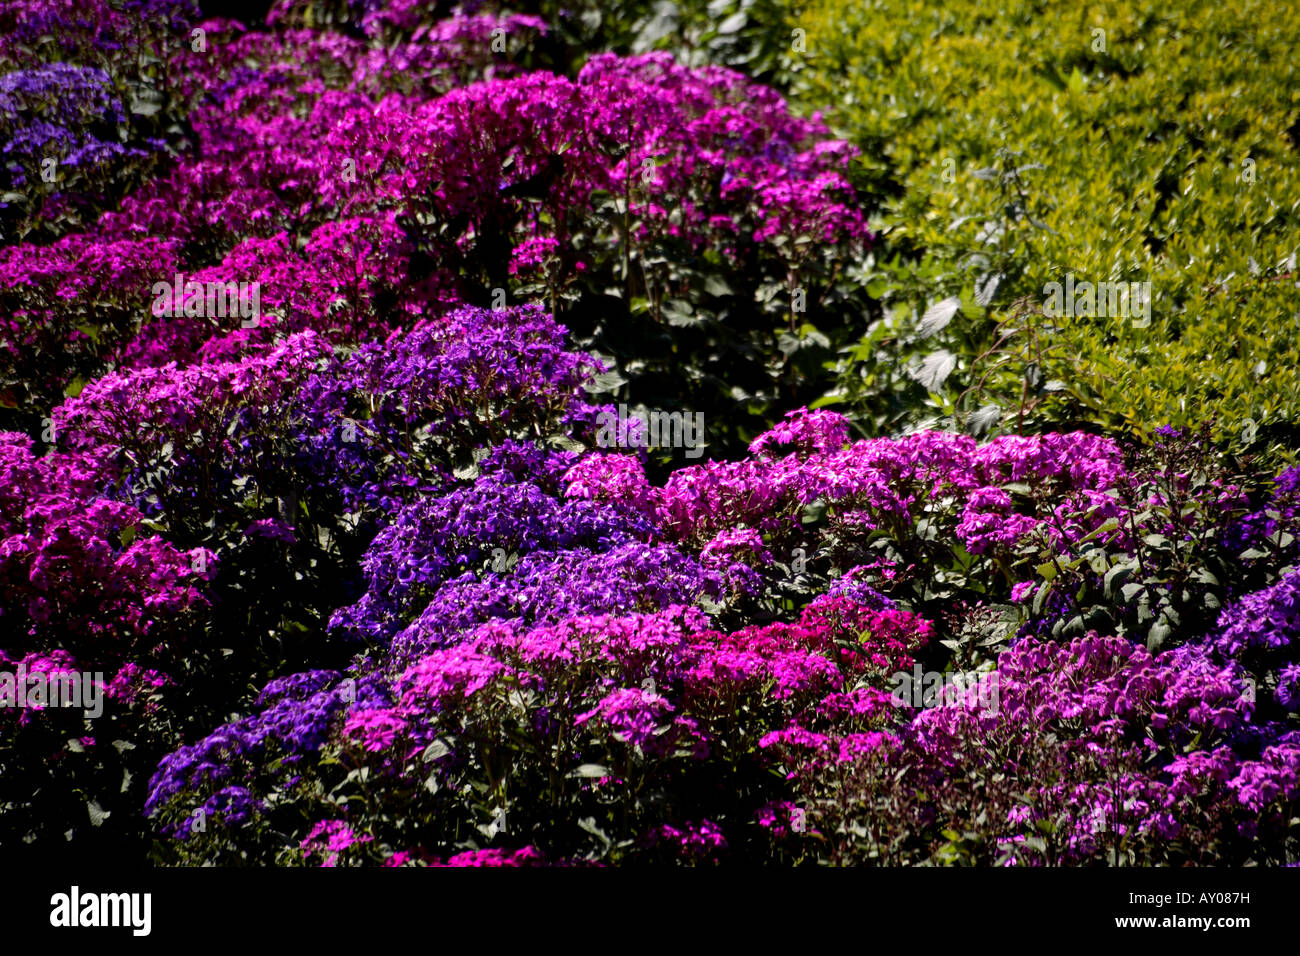 Field of violet flowers and green plants Stock Photo